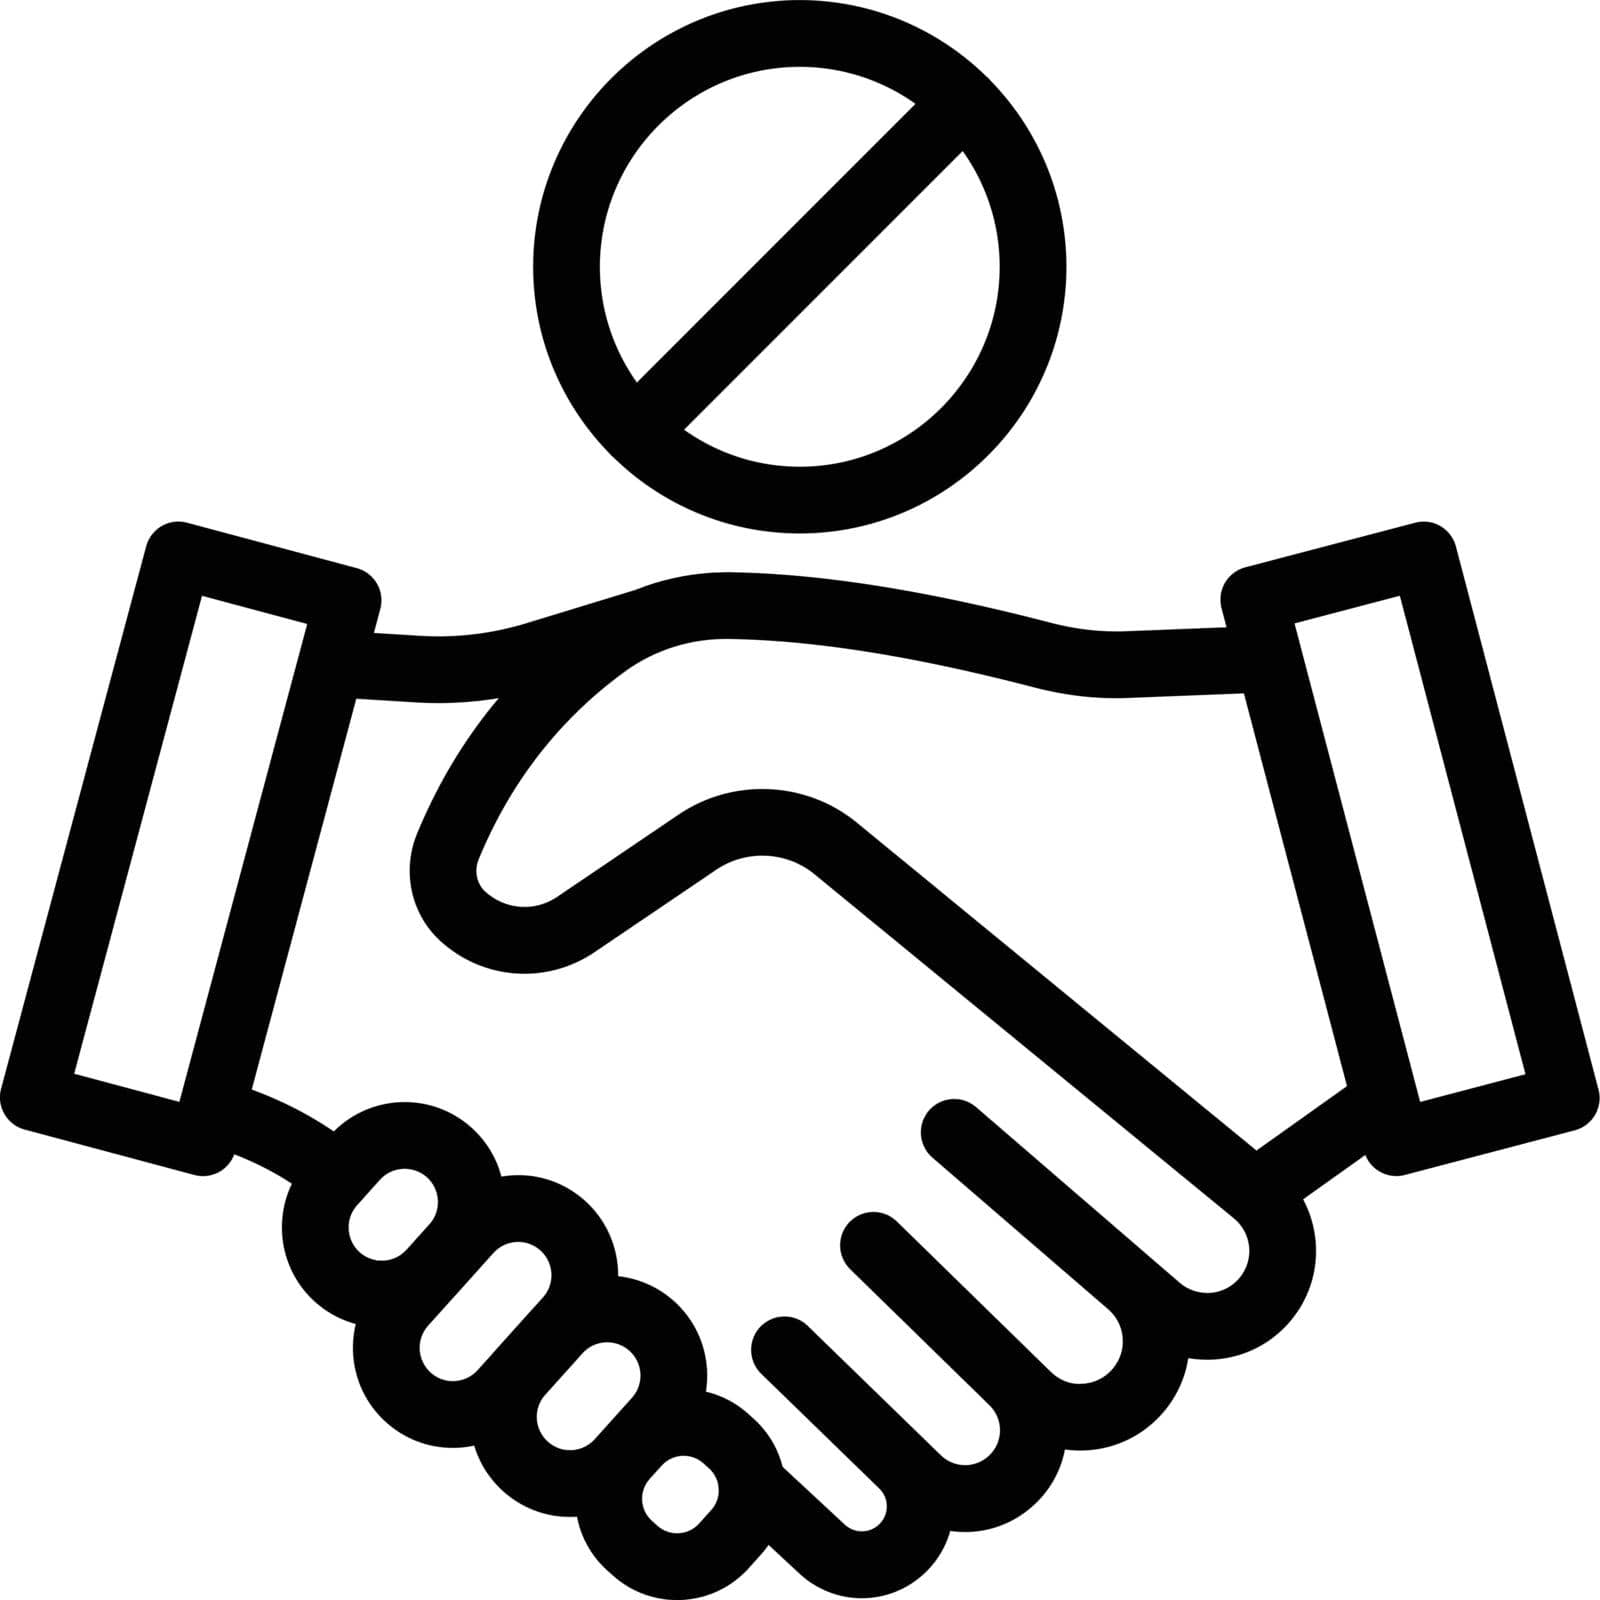 no handshake Vector illustration on a transparent background. Premium quality symmbols. Thin line vector icons for concept and graphic design.